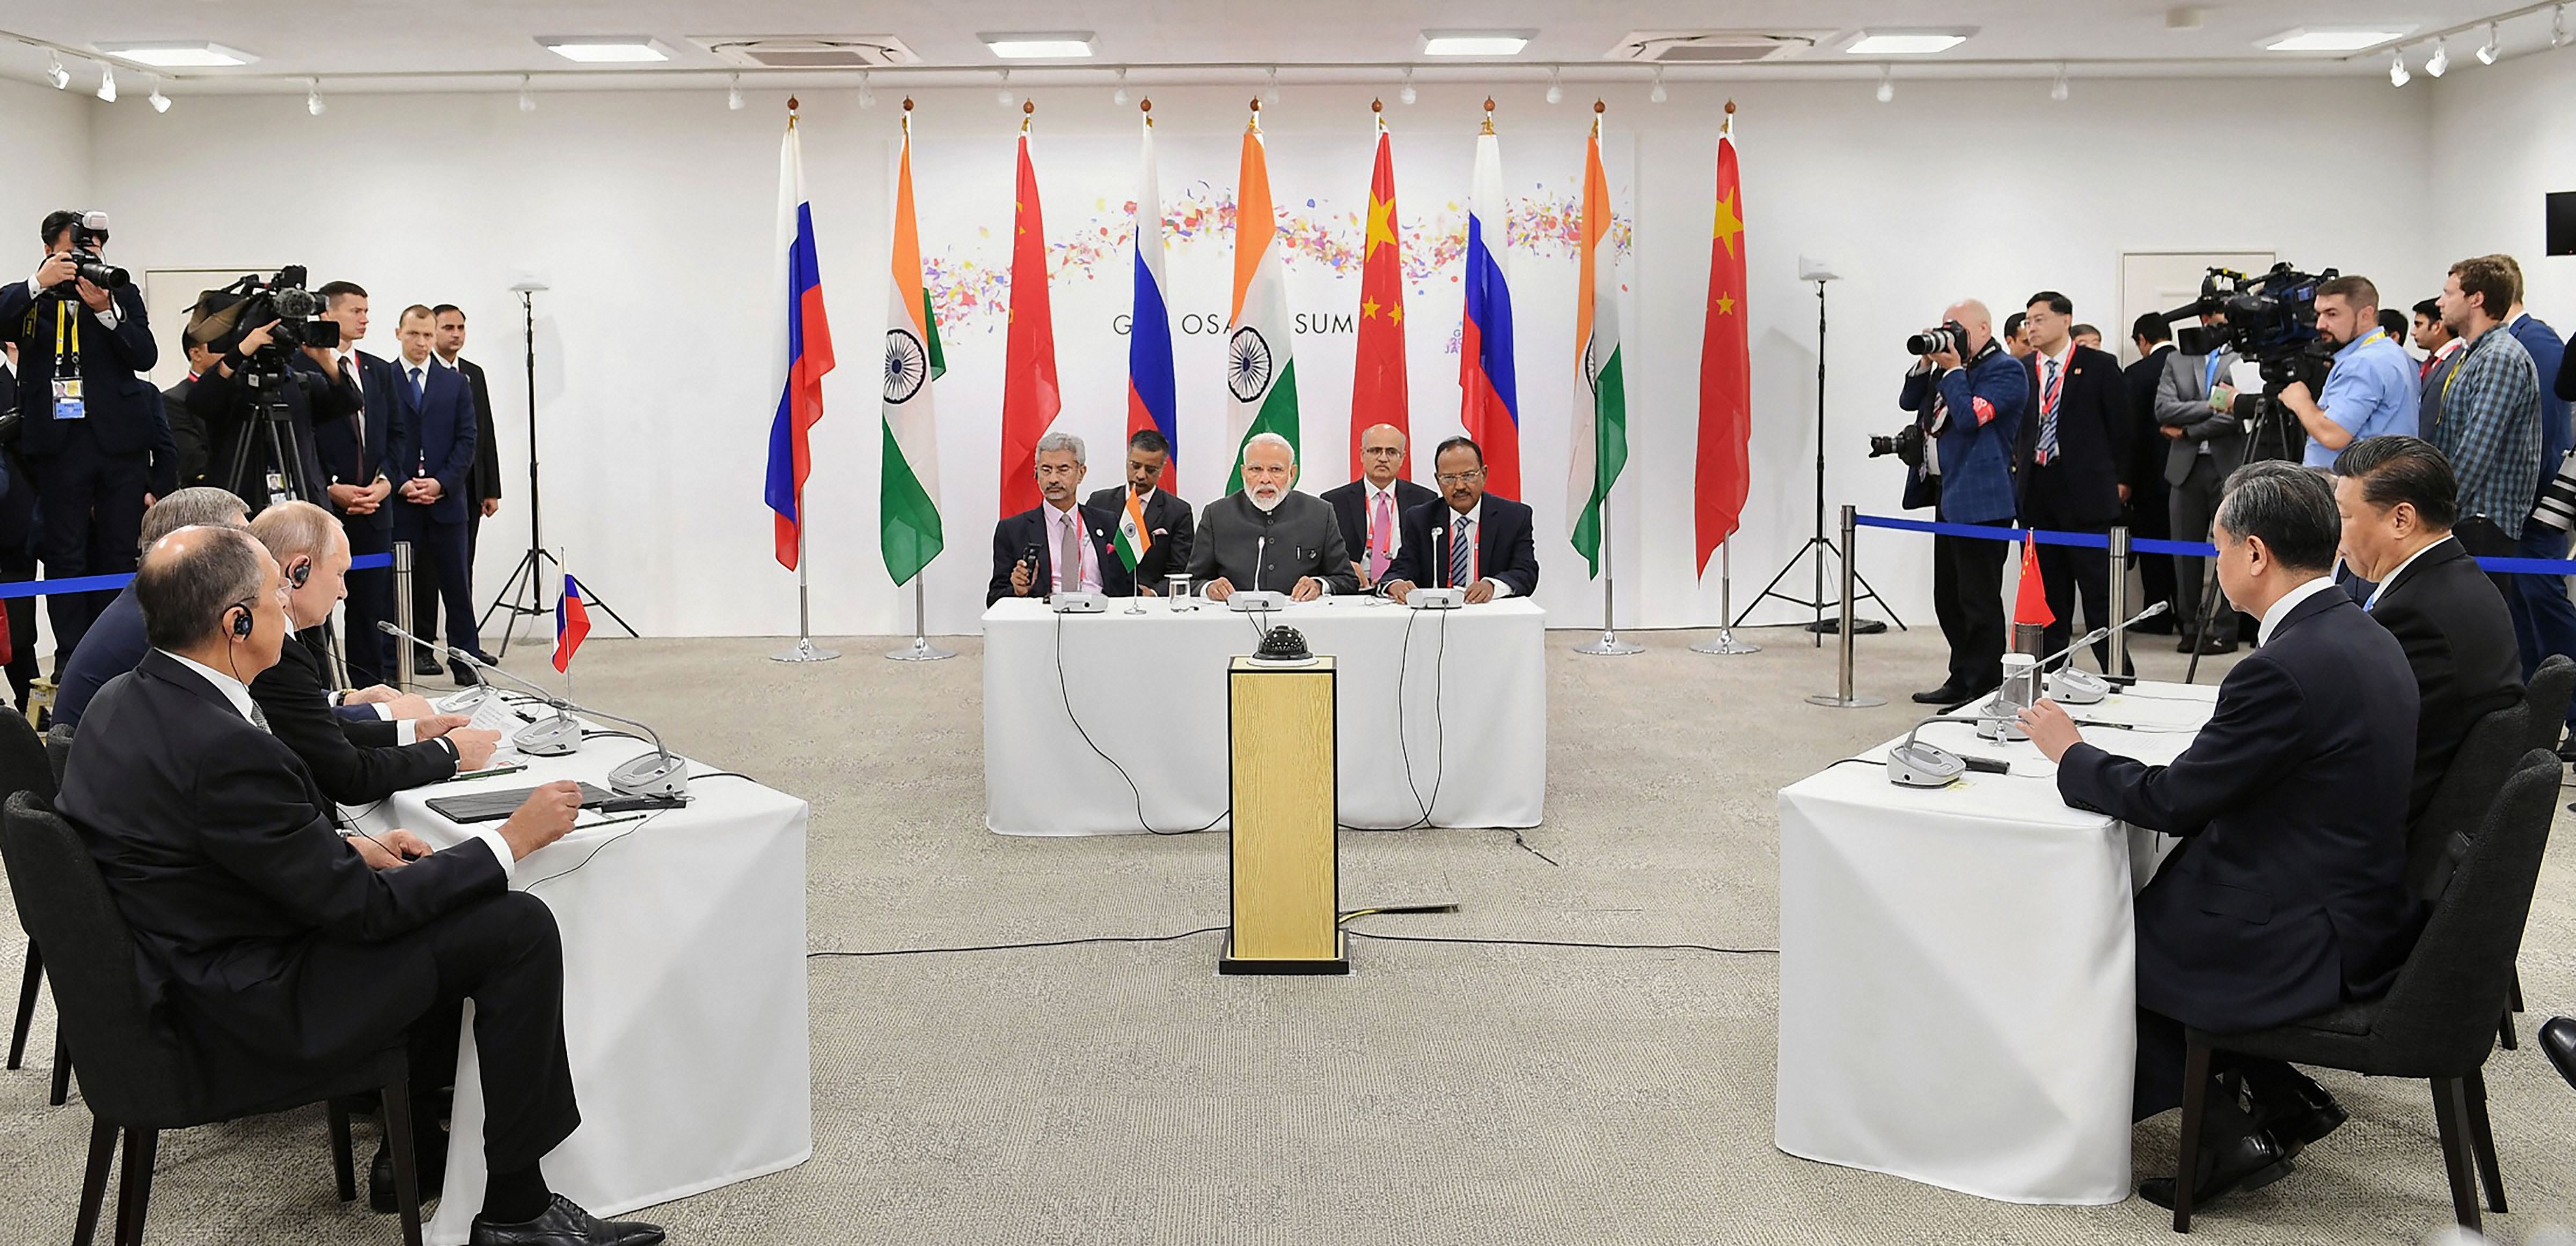 Prime Minister Narendra Modi at an informal meeting between Russia, India and China (RIC), on the sidelines of the G-20 Summit, in Osaka, Japan - PTI